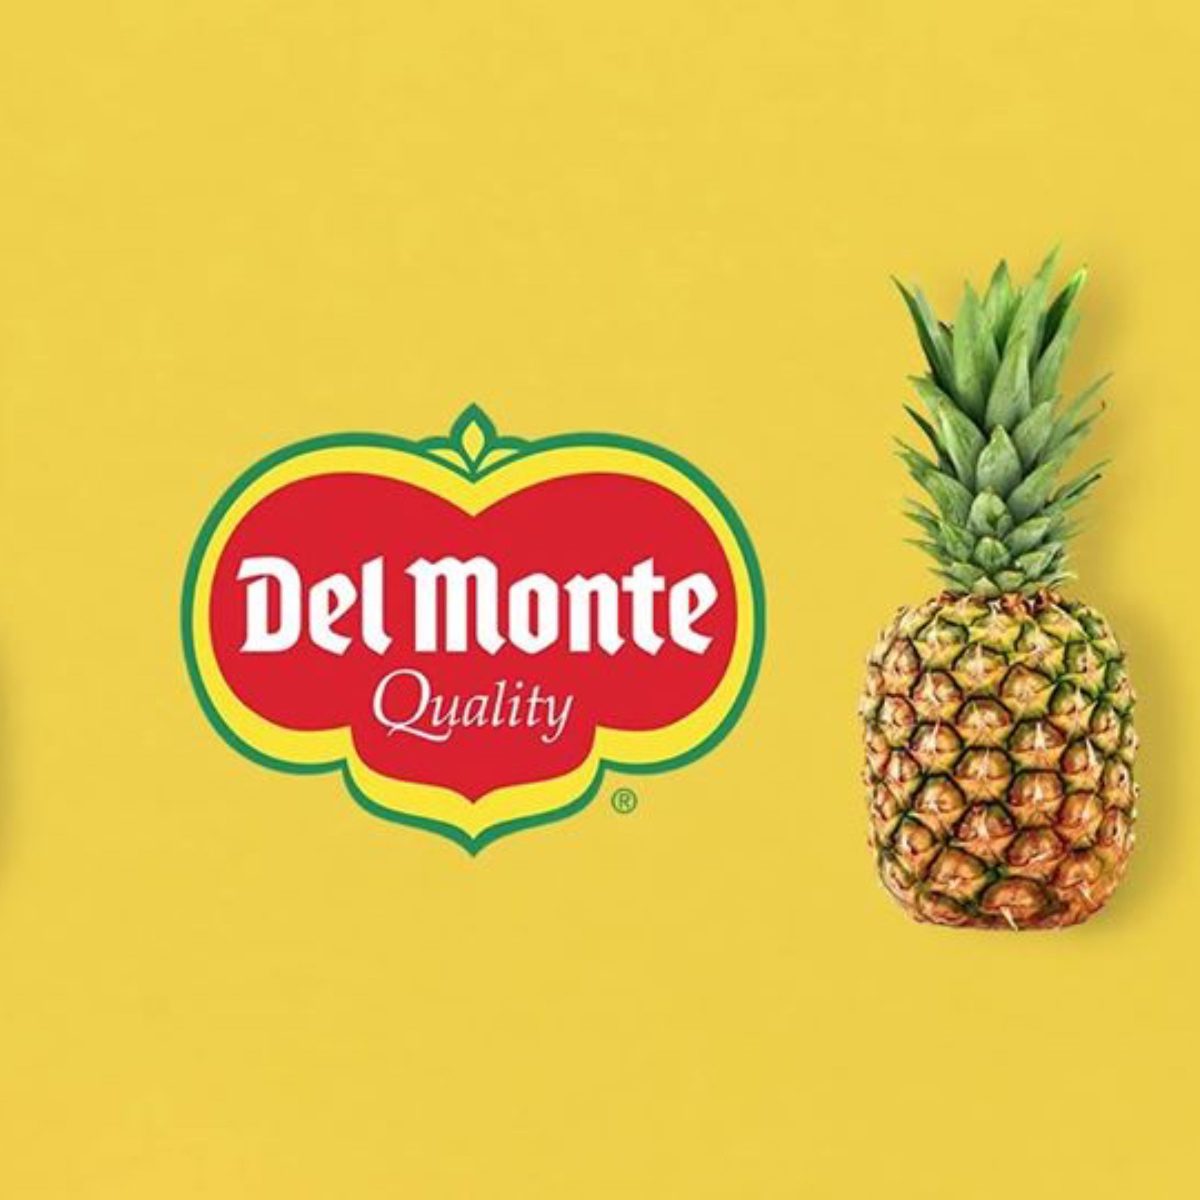 <p><strong><a class="SWhtmlLink" href="https://freshdelmonte.com/" rel="noopener">Fresh Del Monte Produce</a>, Coral Gables</strong></p> <p>In addition to their large produce portfolio, Coral Gables-based Fresh Del Monte also is one of the largest canned fruit and vegetable companies in the world. You probably recognize their brand in the grocery store when you're picking up some canned tomatoes <a class="SWhtmlLink" href="https://www.tasteofhome.com/collection/homemade-pasta-sauce-recipes/" rel="noopener">for your favorite tomato sauce</a>.</p>